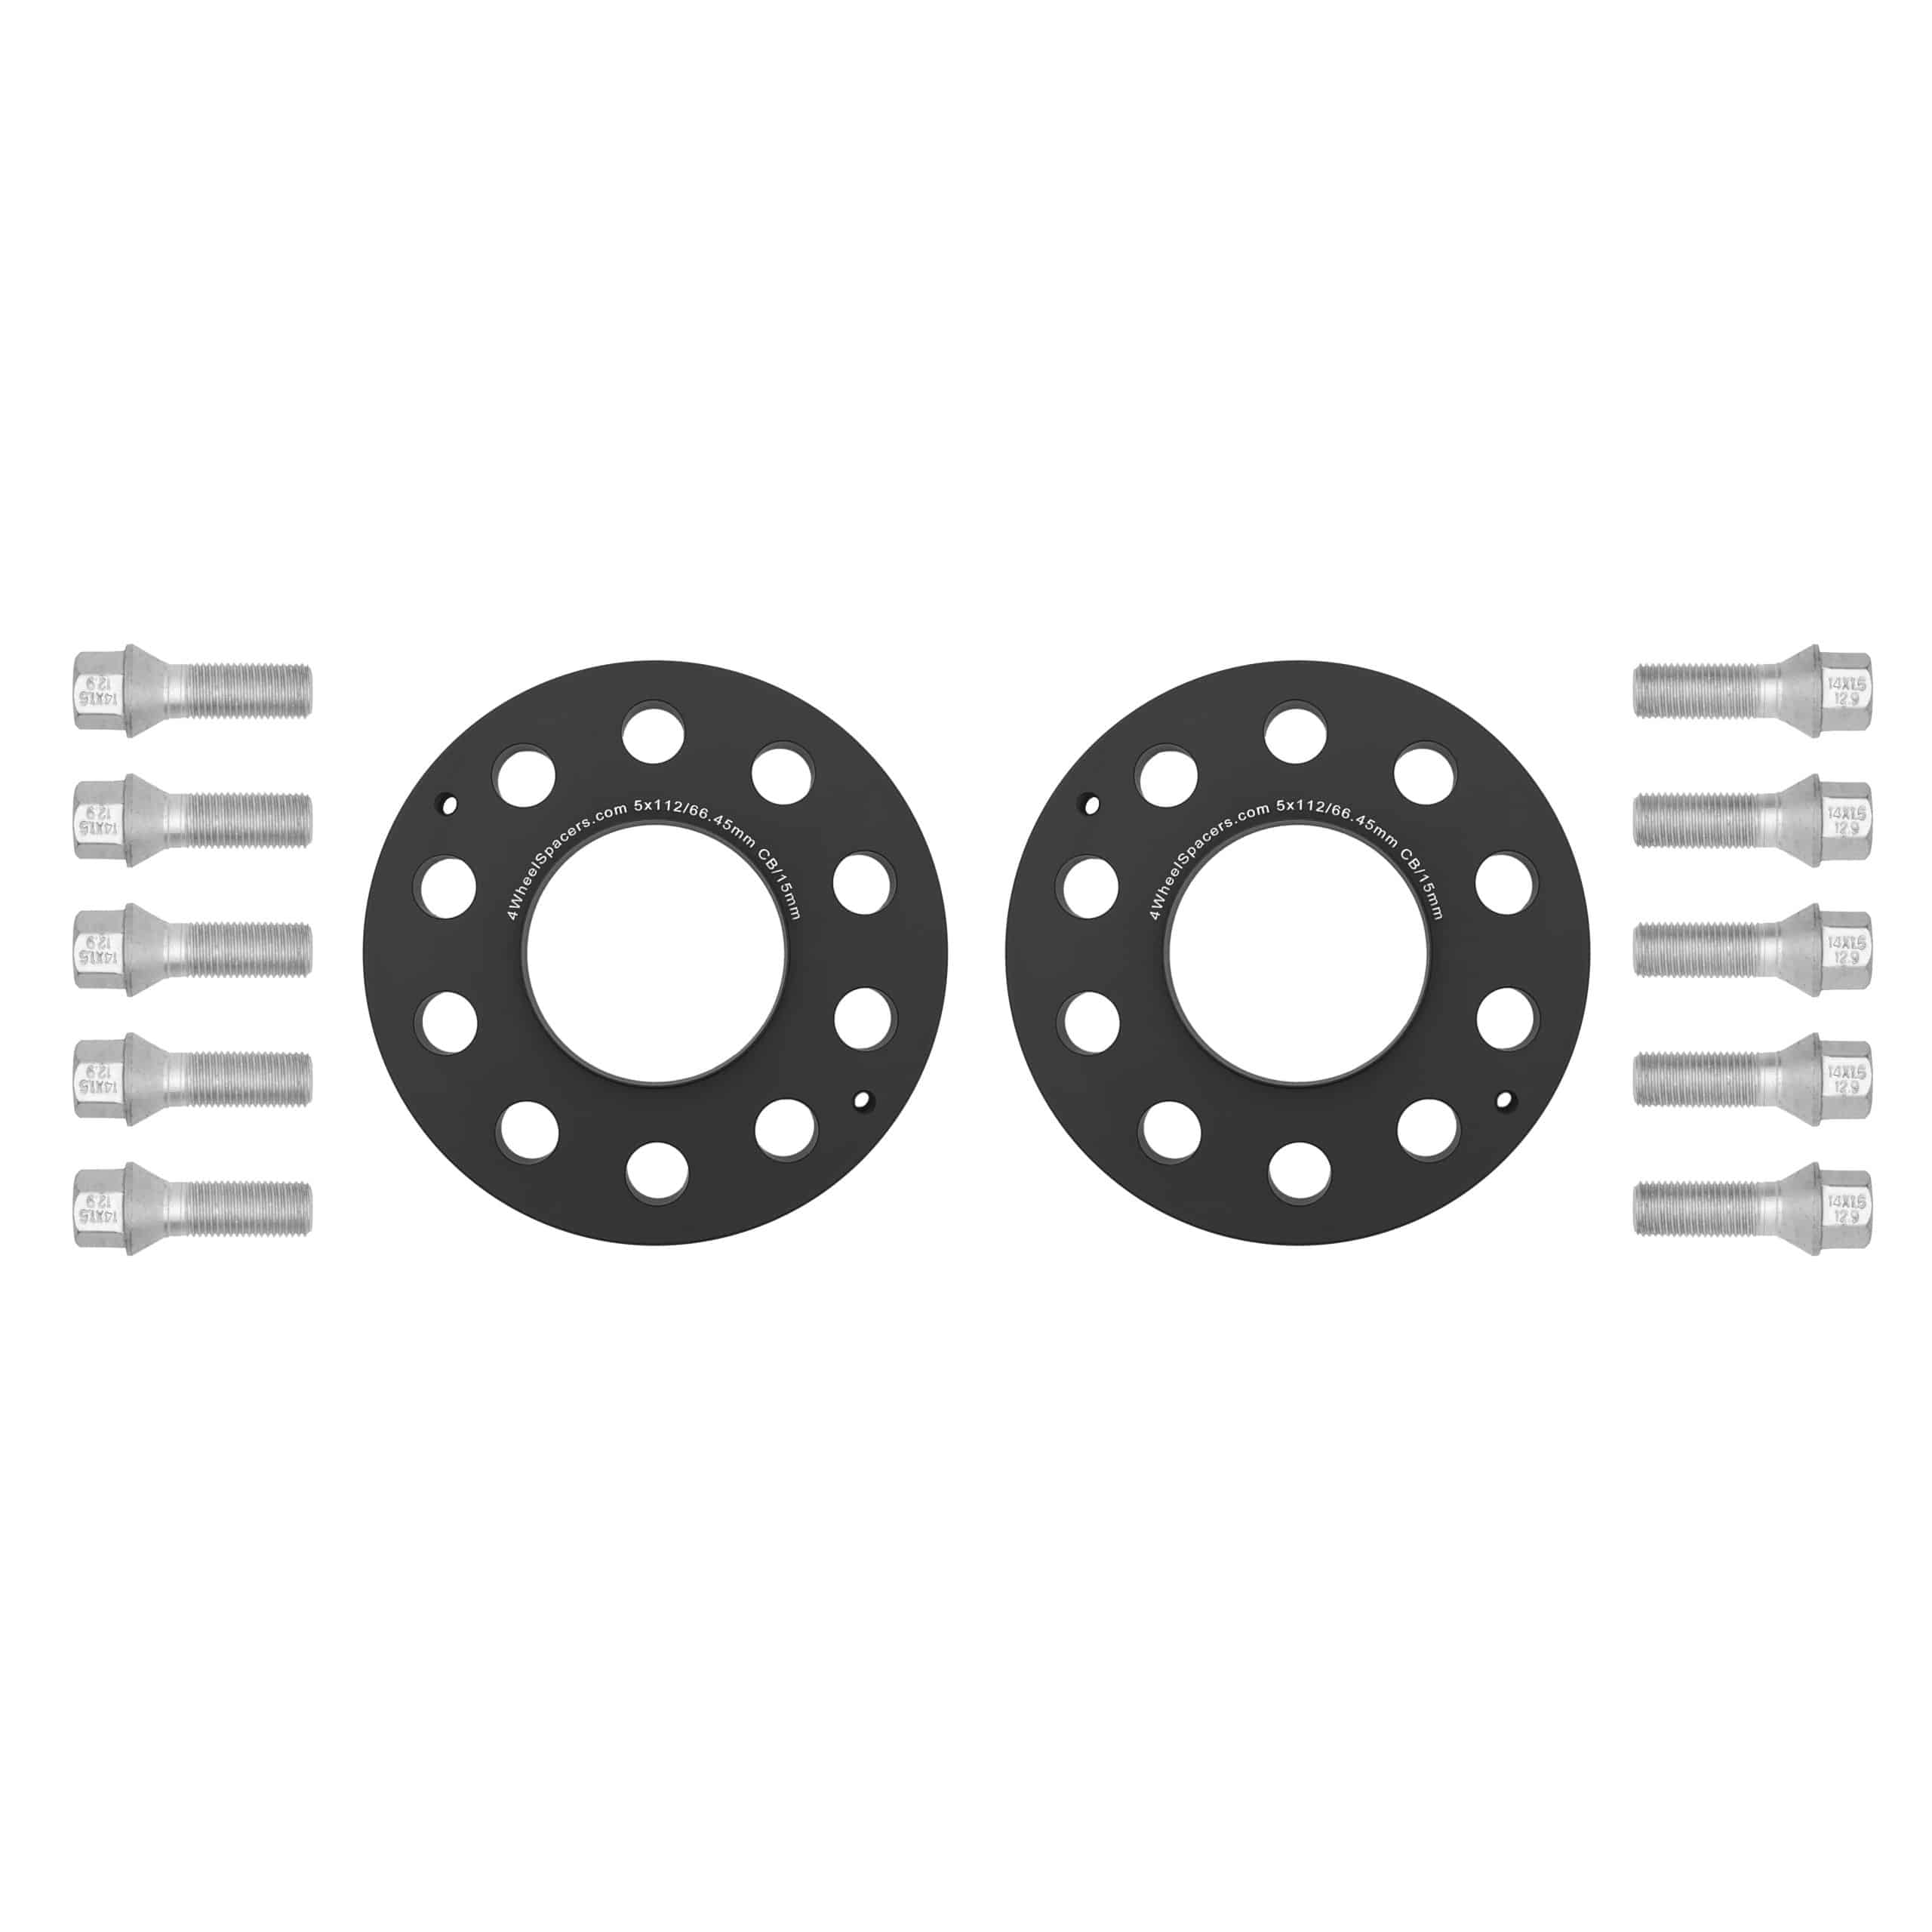 Mercedes-Benz 15mm Hub-Centric Wheel Spacers With Ball Seat Bolt Kit, 4WheelSpacers.com